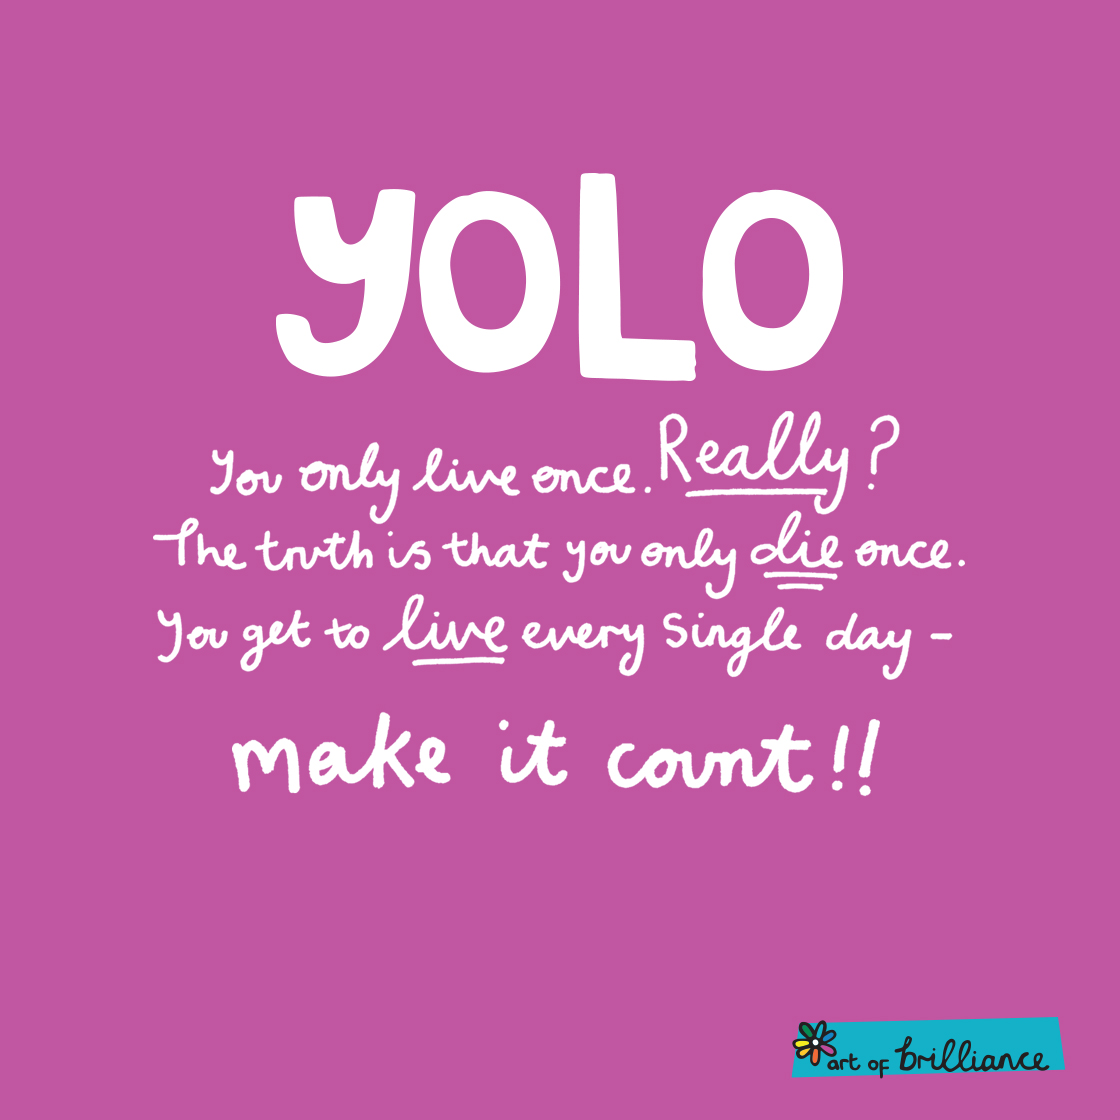 #YOLO. You only live once I get it I know it means well But it’s 100% wrong…